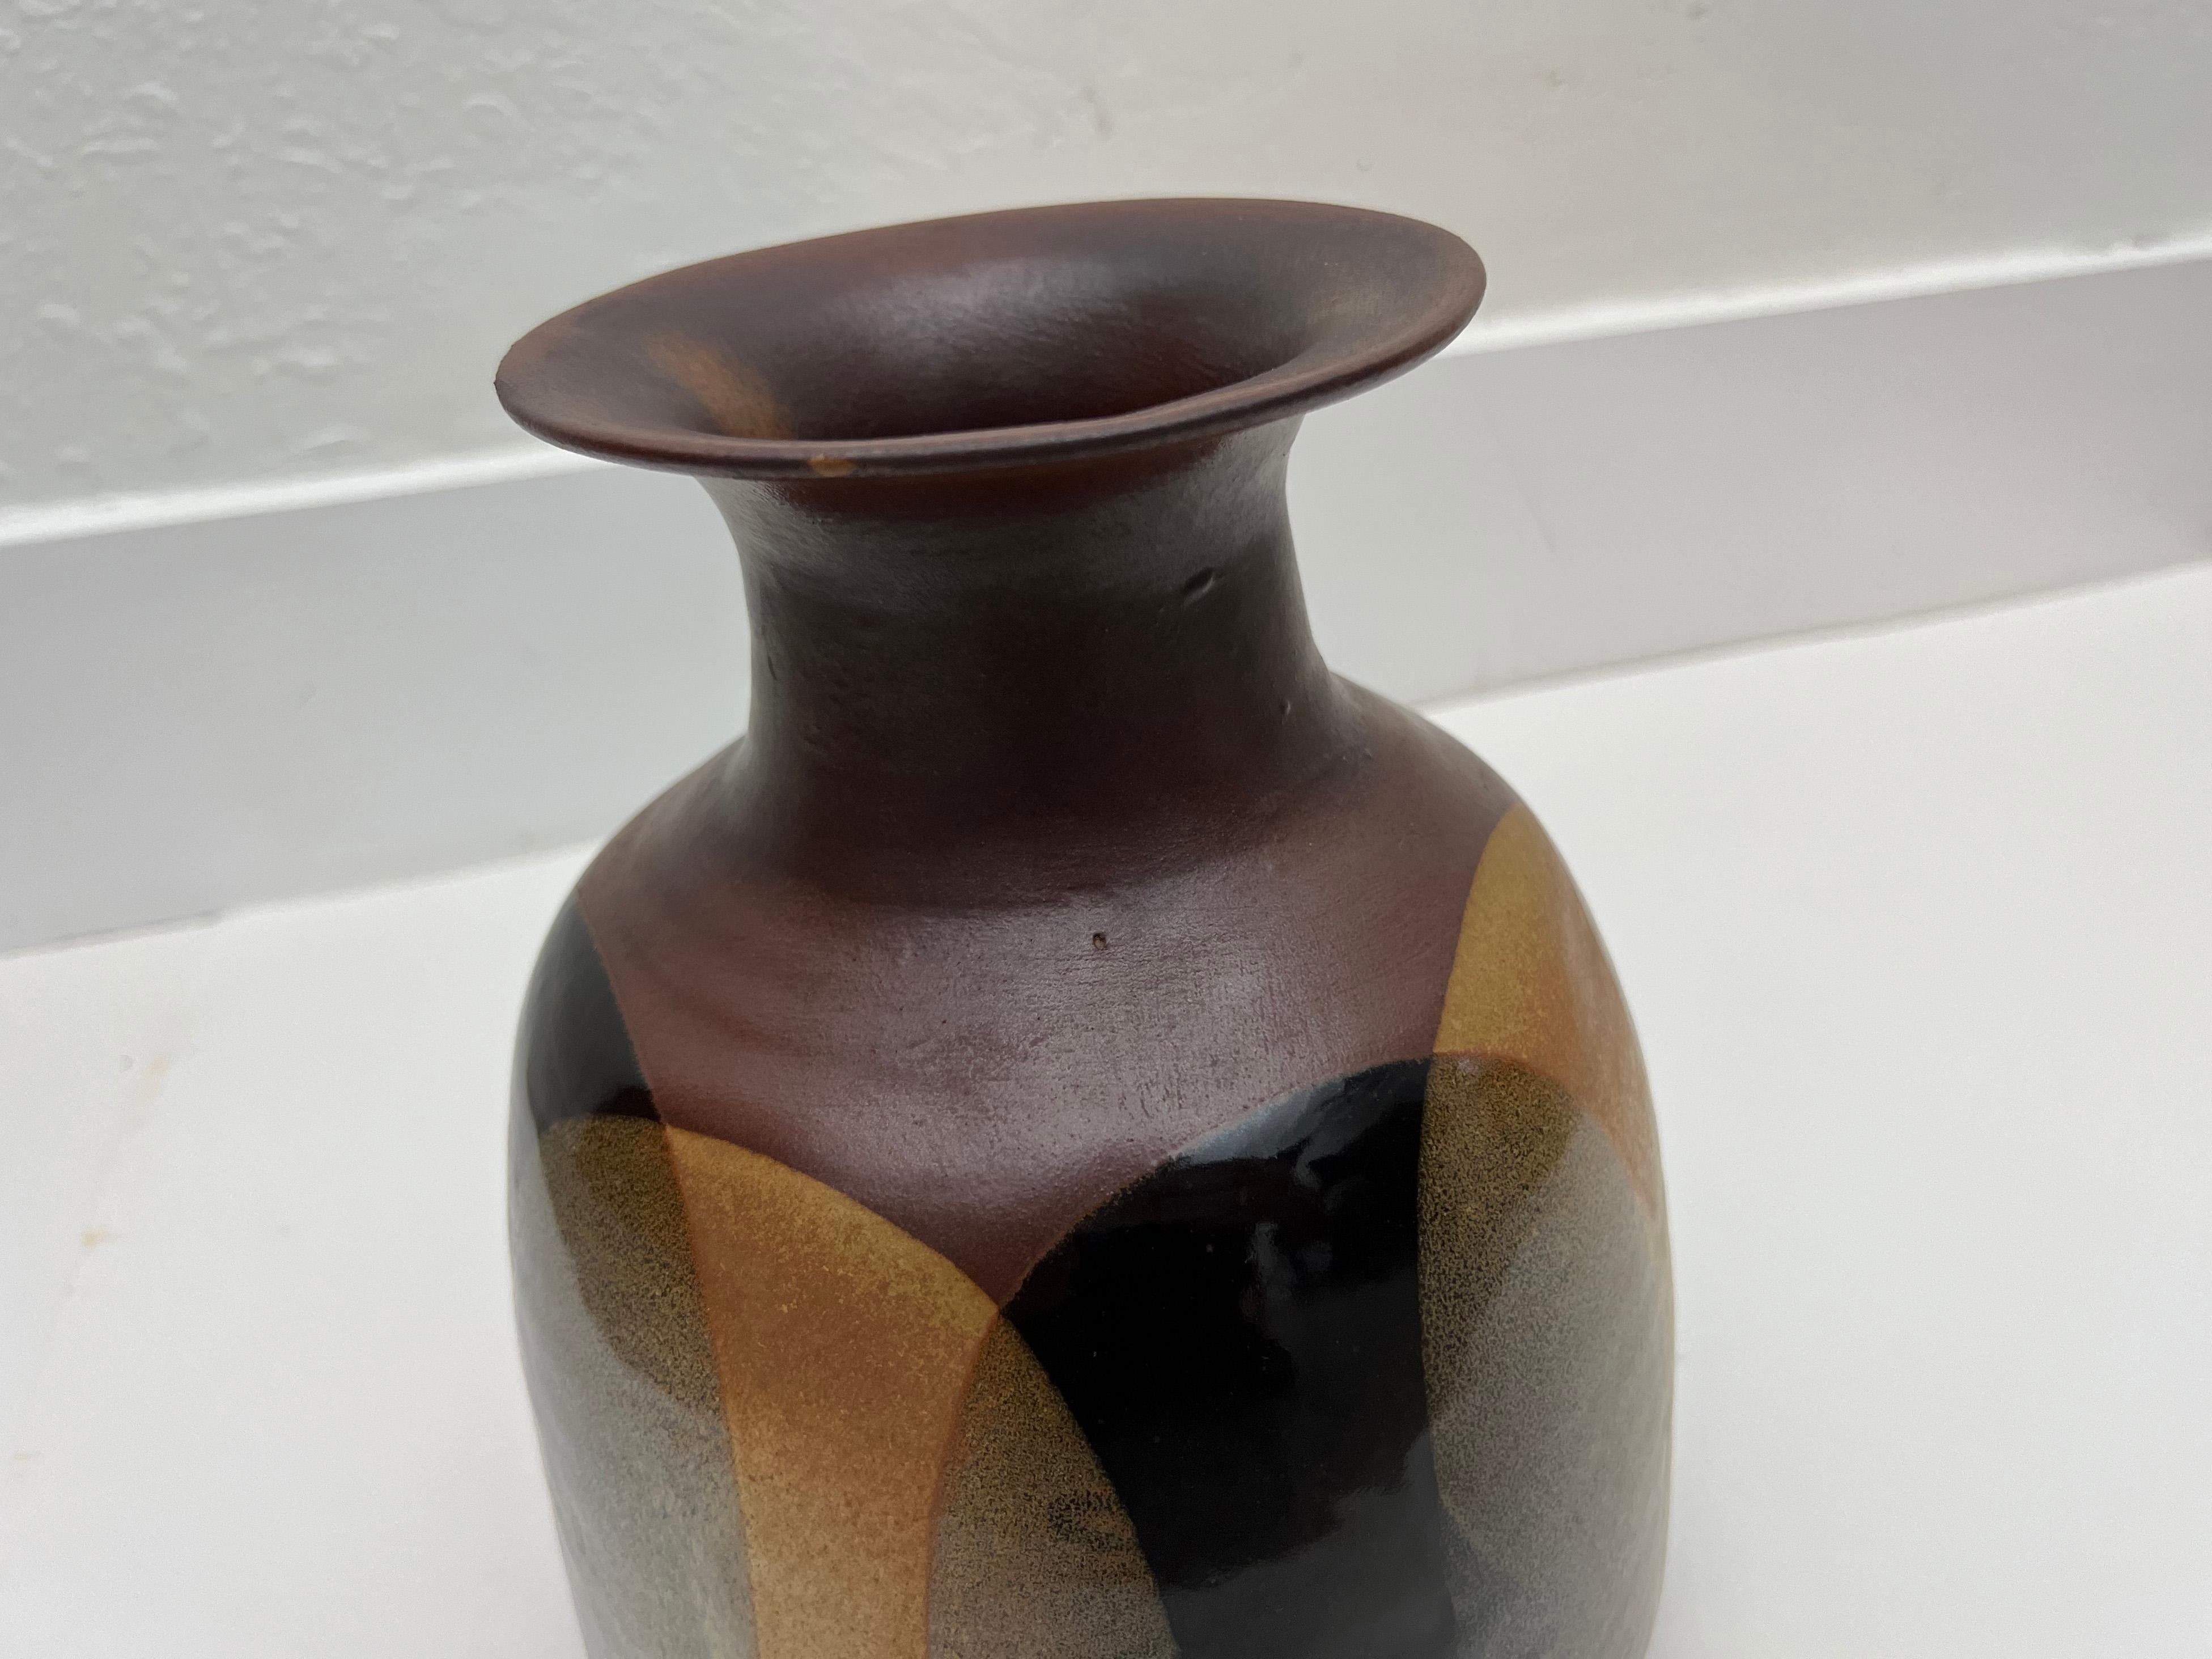 Vintage ceramic vase with signature overlapping glaze design by Pottery Craft.

Designer: Robert Maxwell

Manufacturer: Pottery Craft

Year: 1960s

Style: Mid-Century Modern

Dimensions: 9.5